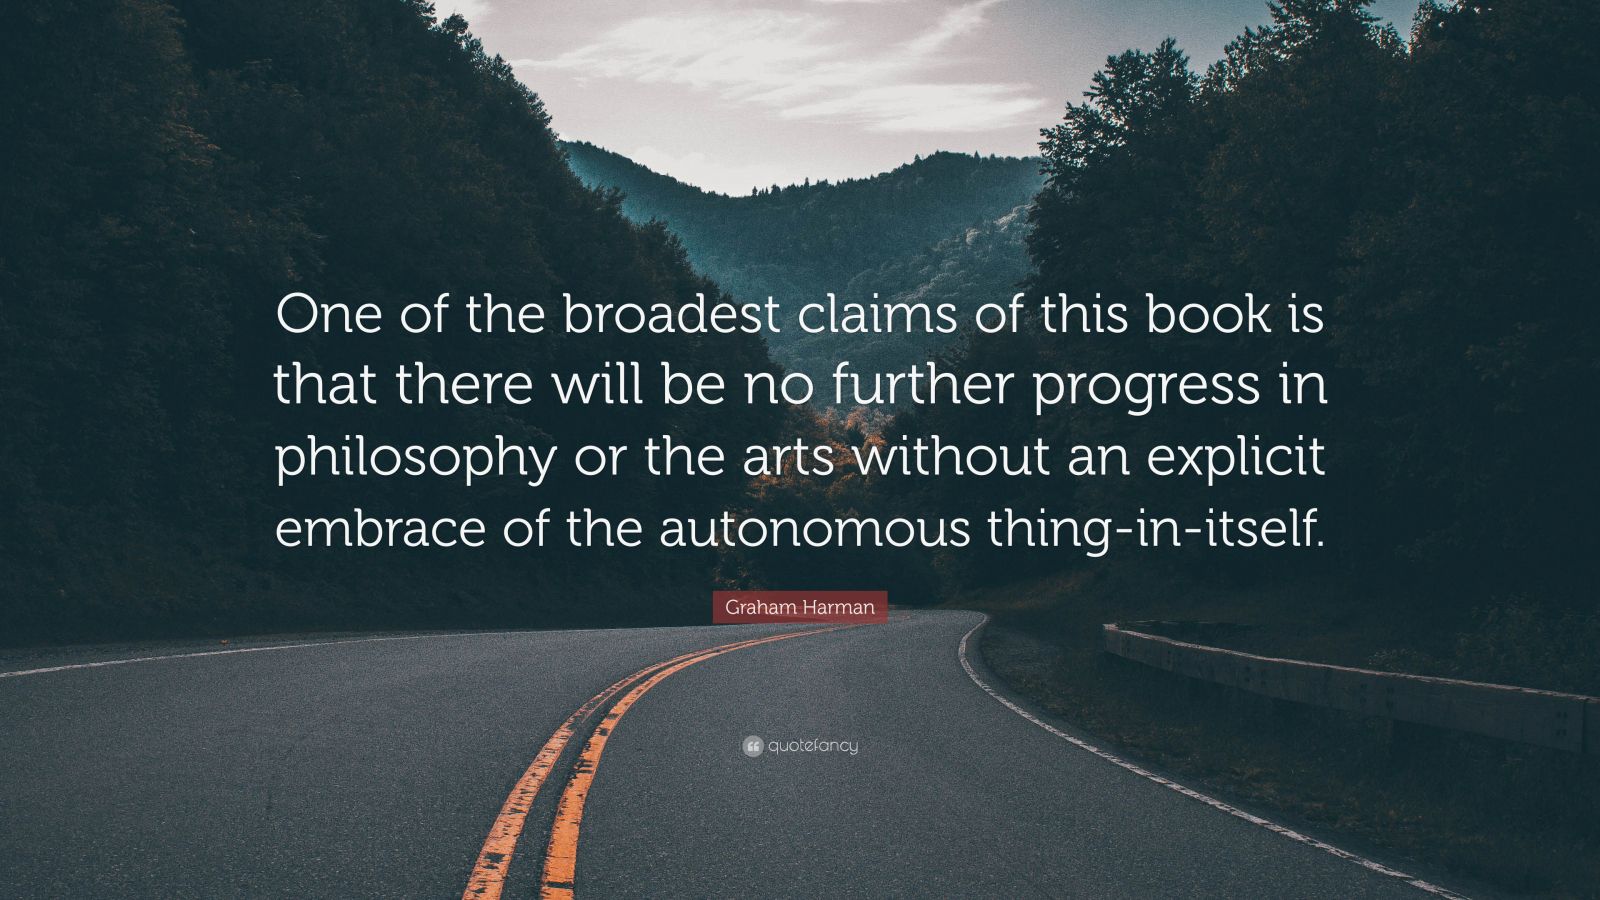 Graham Harman Quote: “One of the broadest claims of this book is that ...